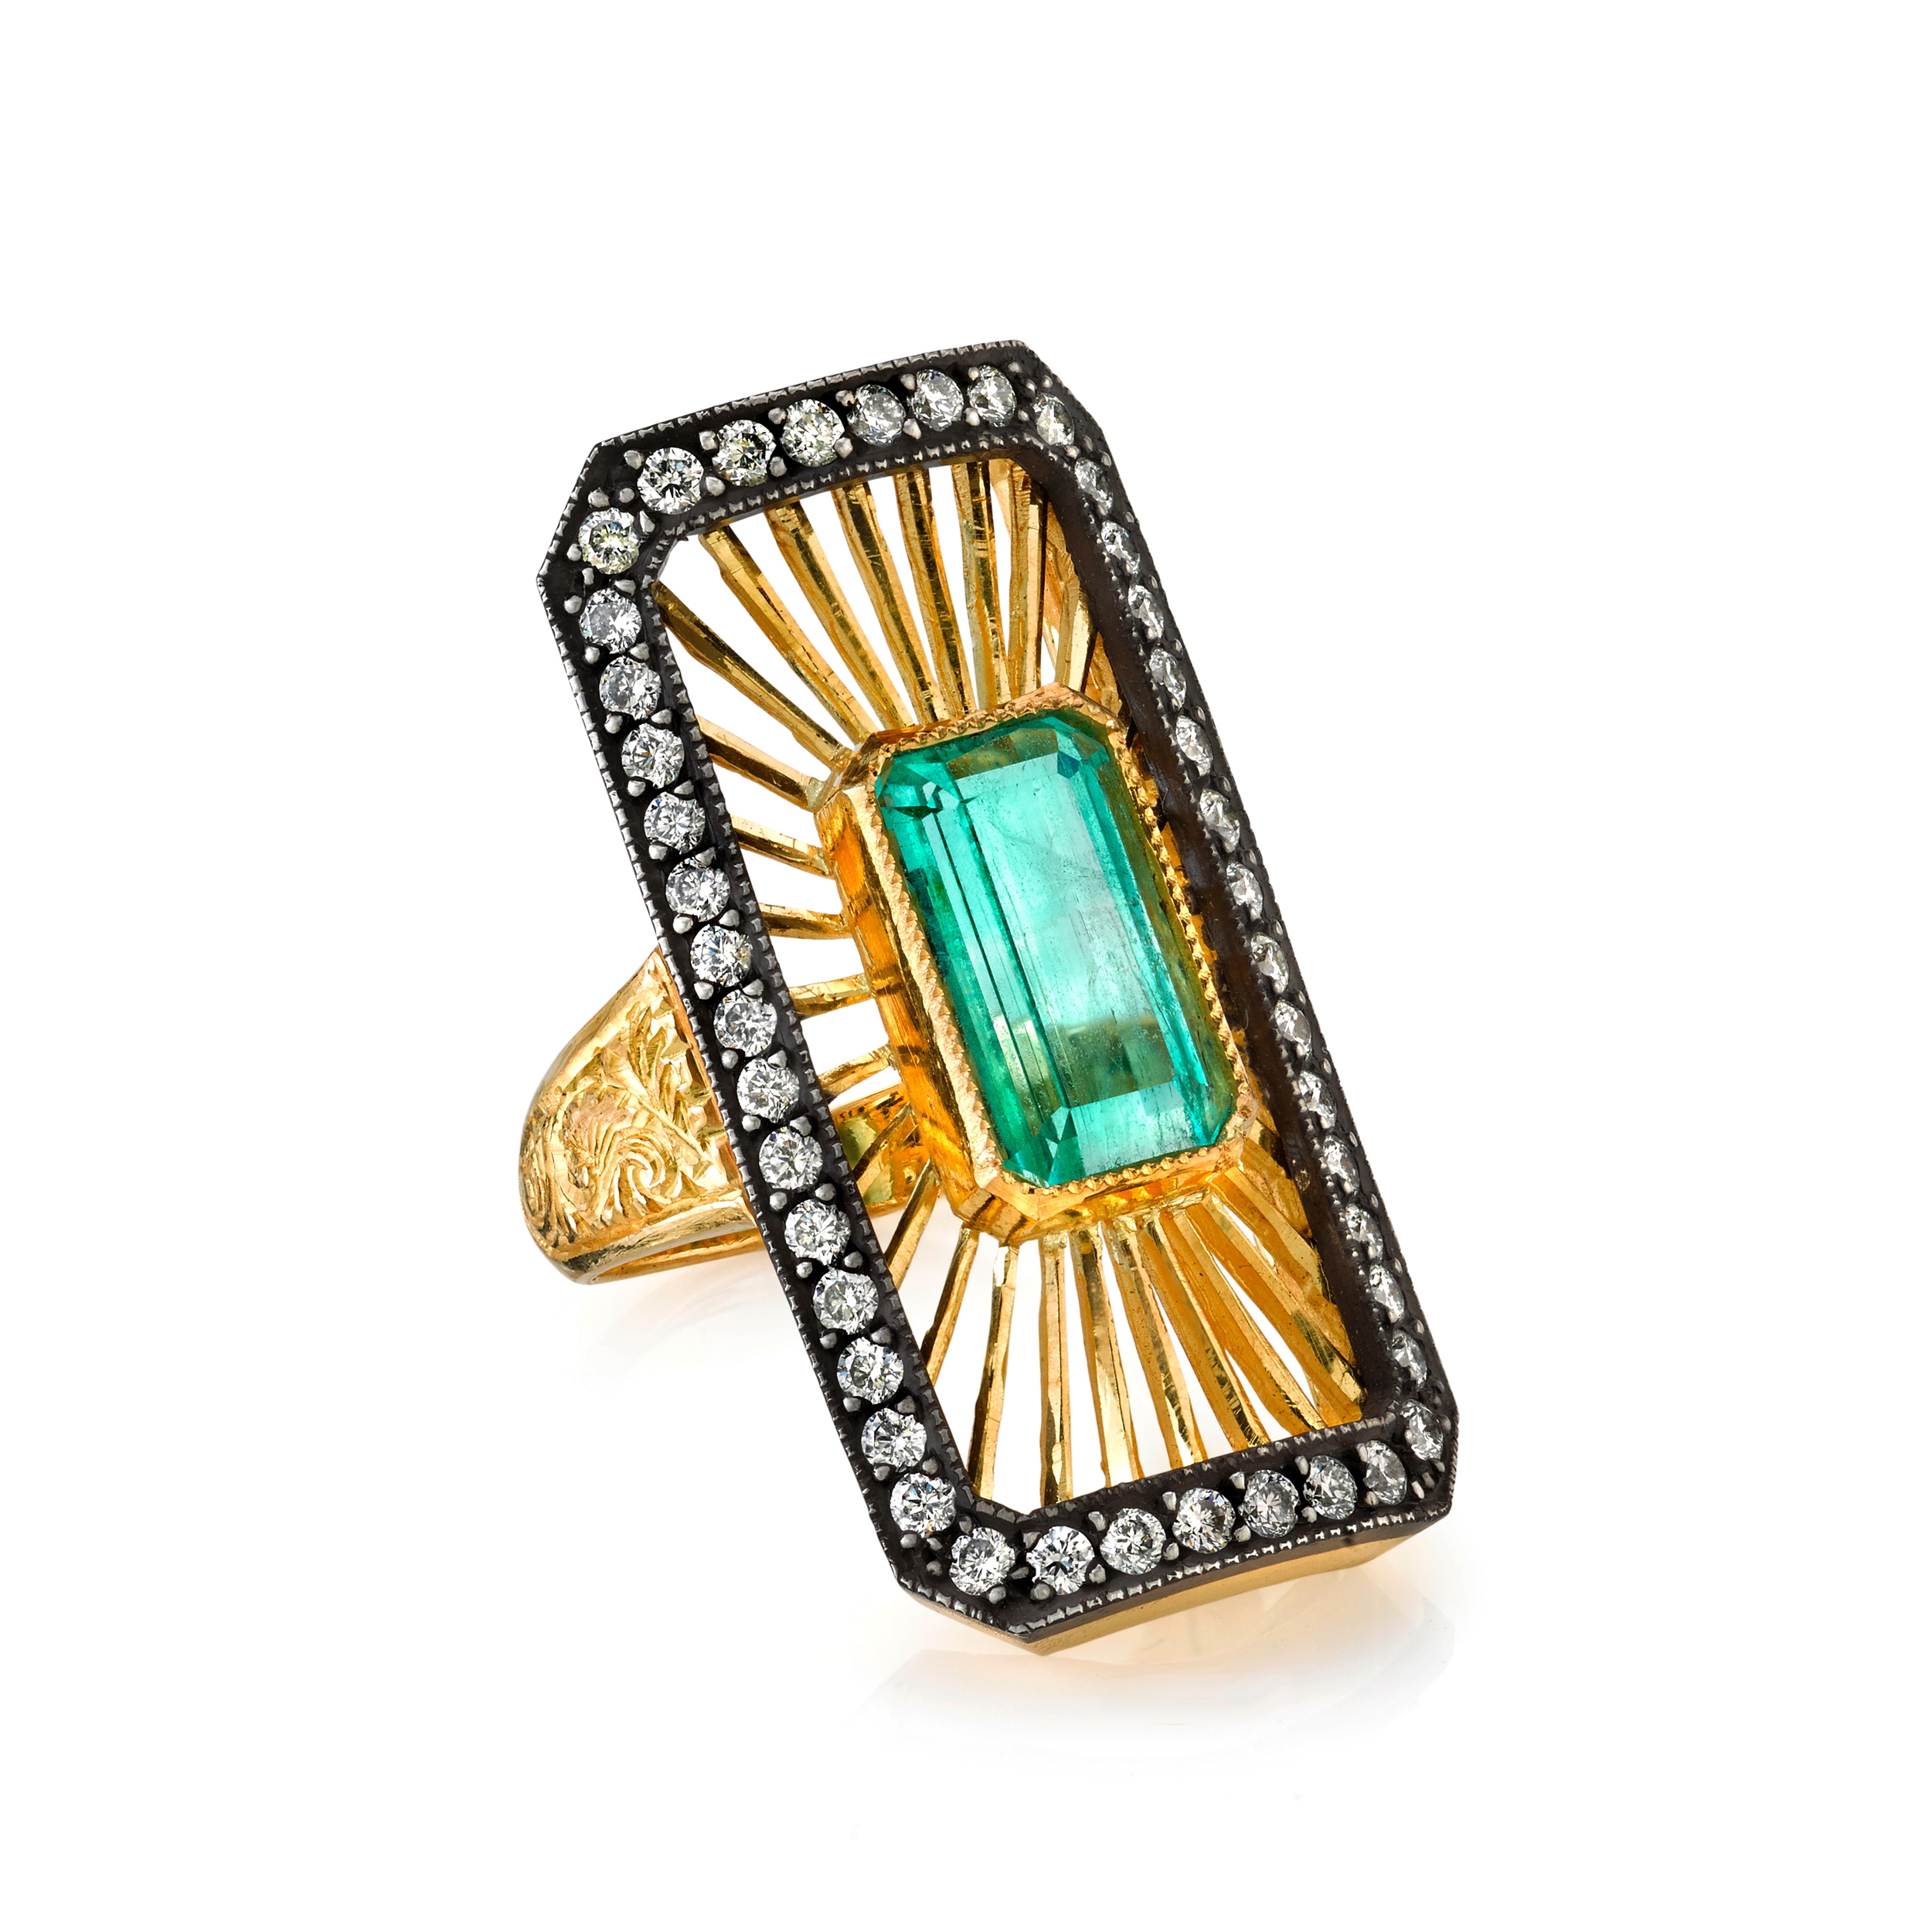  22K gold and silver Deco ring with an emerald center and diamonds, $14,560.&nbsp; 